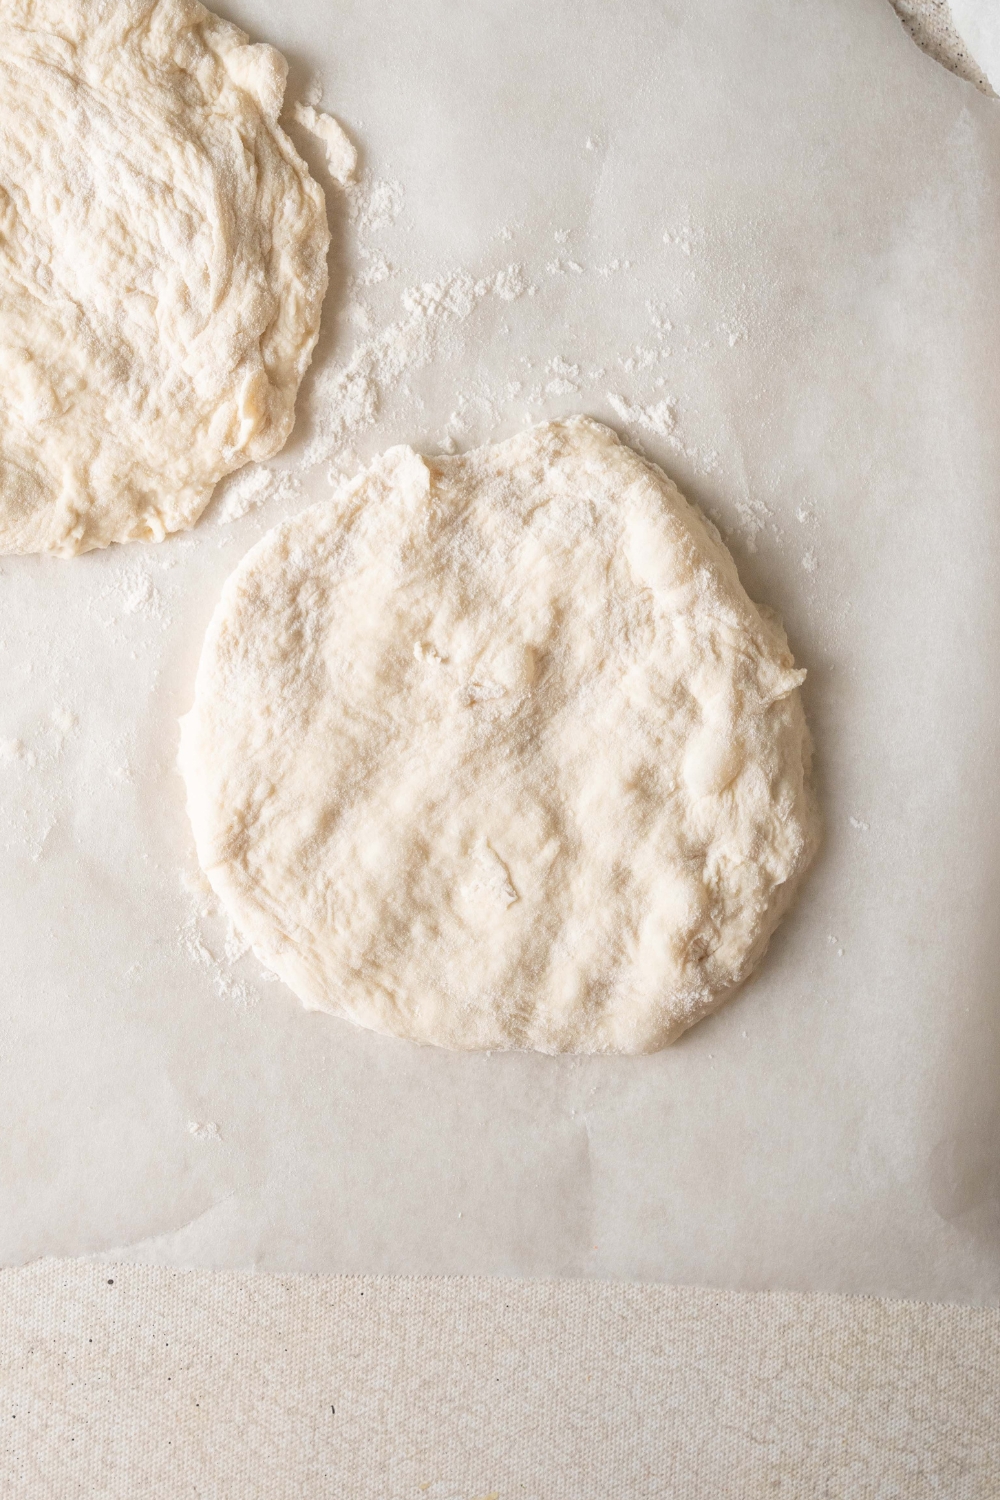 A circle of pizza dough is laying on a piece of parchment paper. There is flour dusted around it.